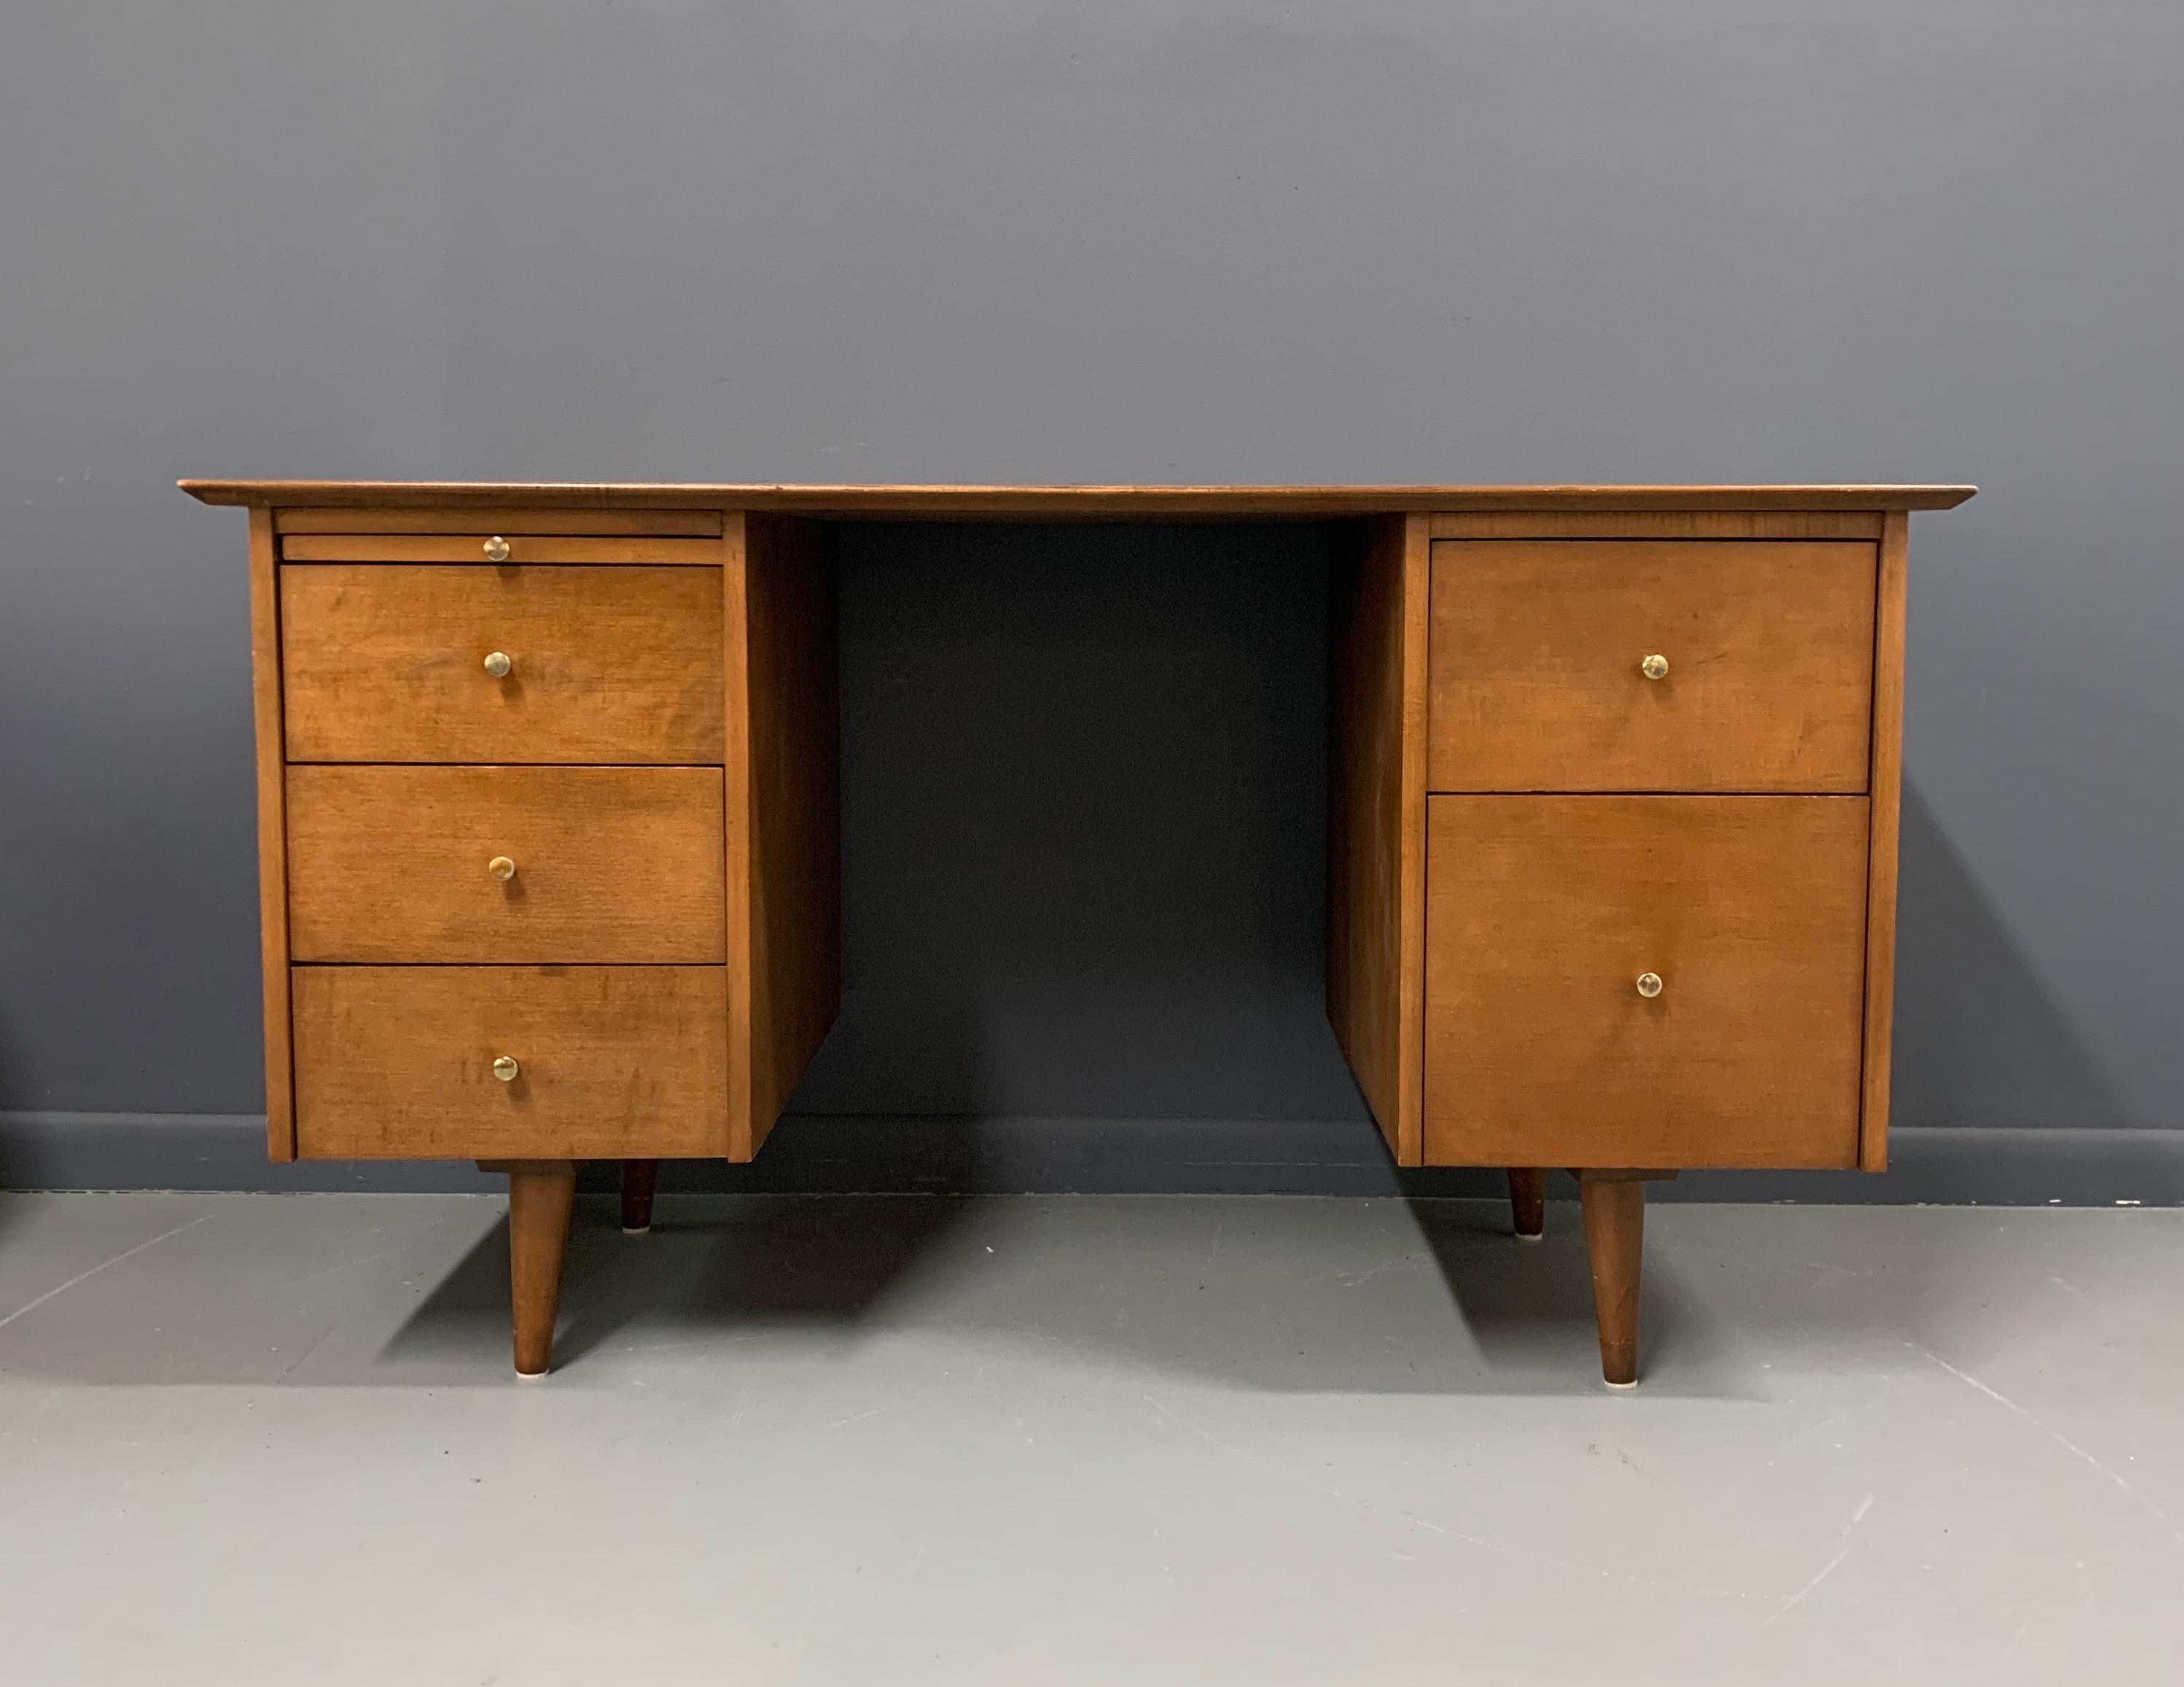 A fine example of a double pedestal desk with vintage finish and solid brass hardware. By Paul McCobb for the Planner Group line from Winchendon. American, circa 1950.